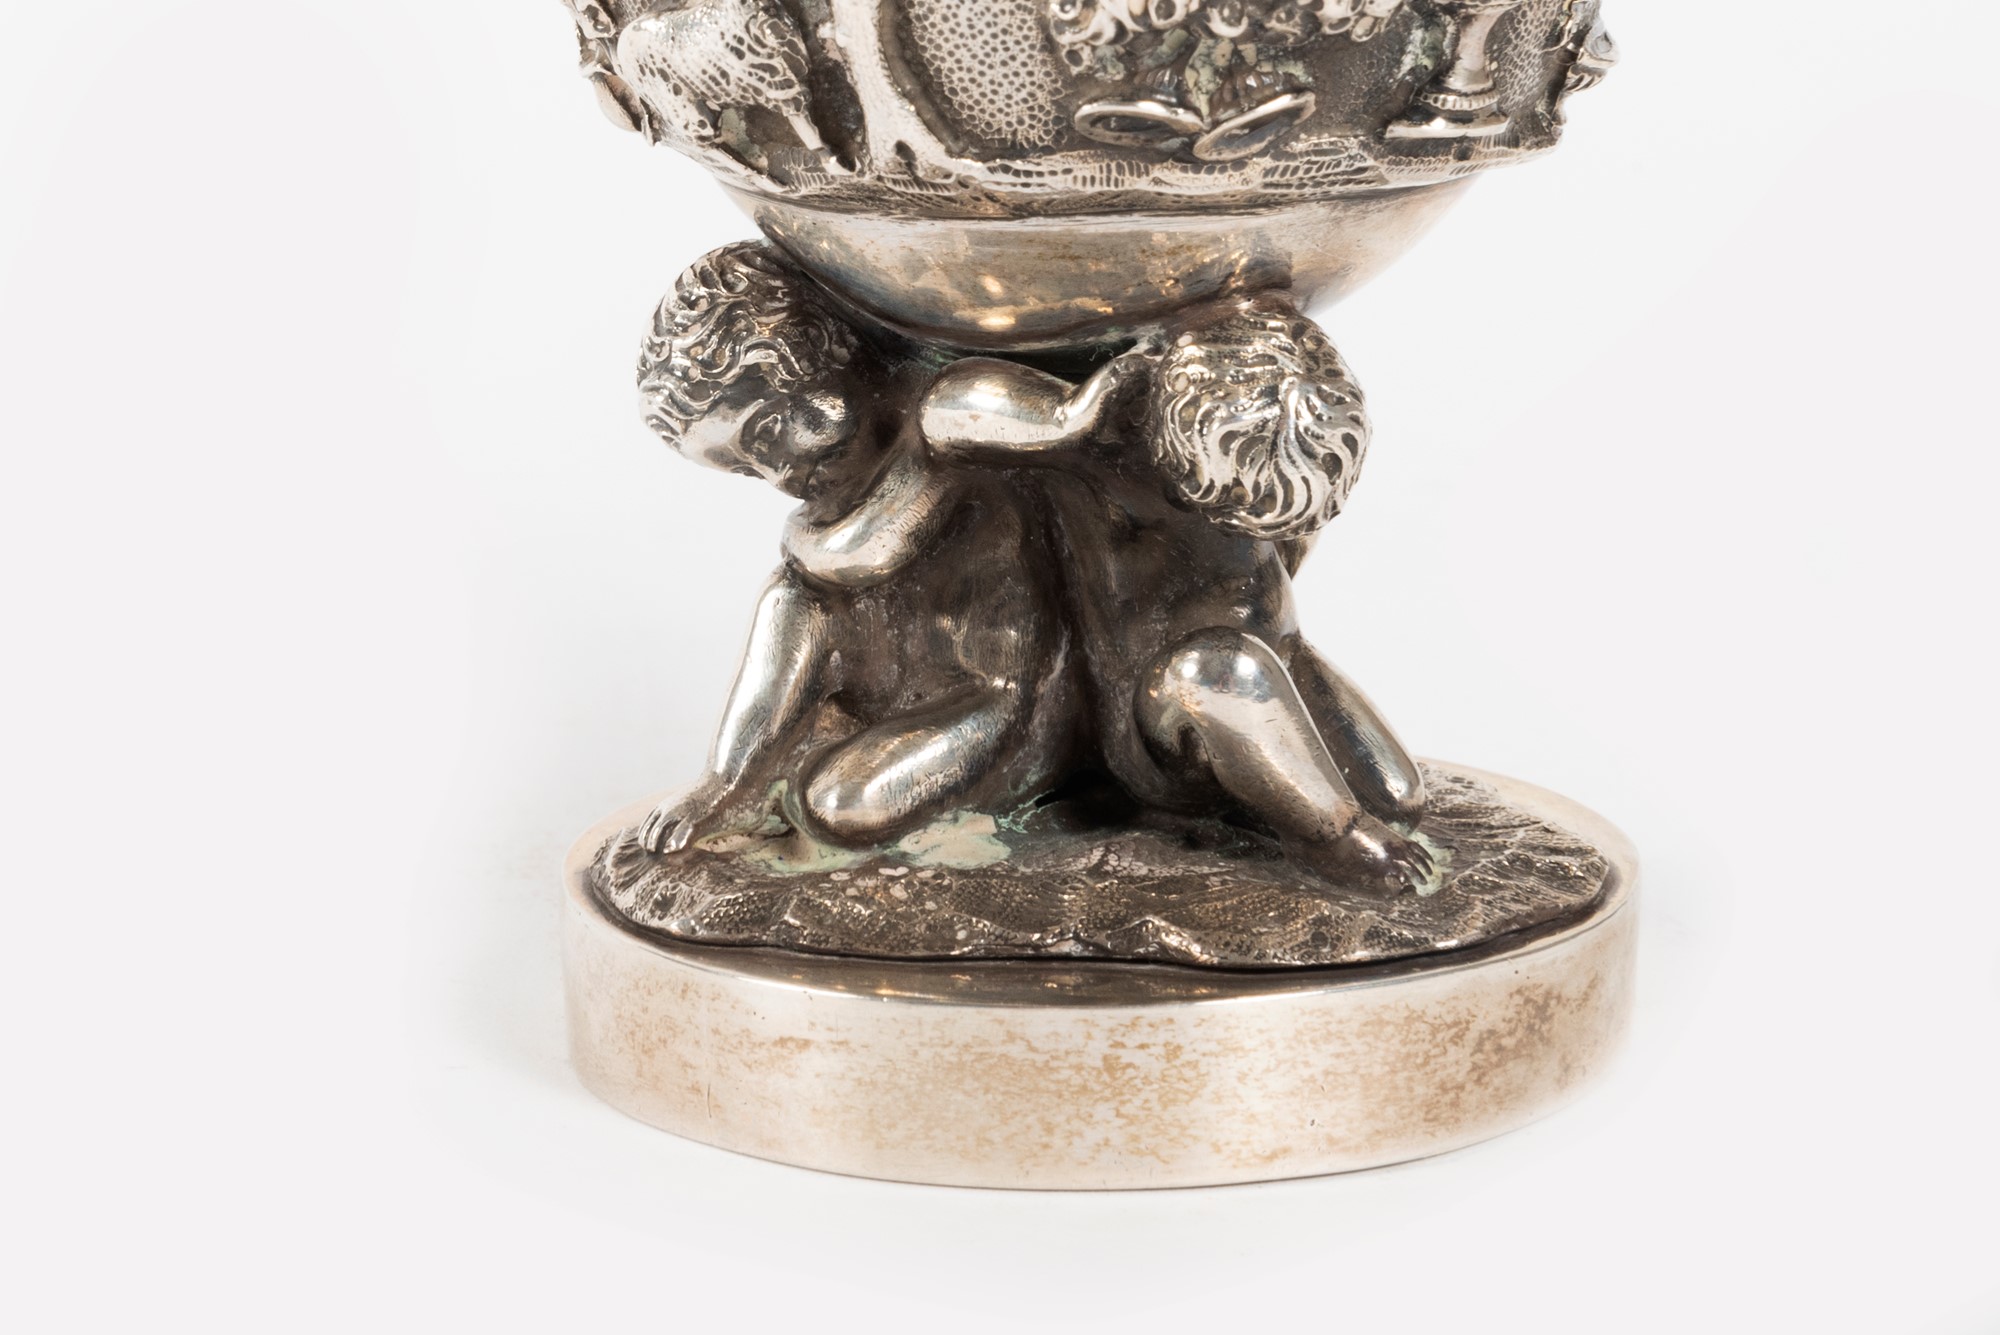 Small vase with silver lid, 19th century - Image 2 of 3